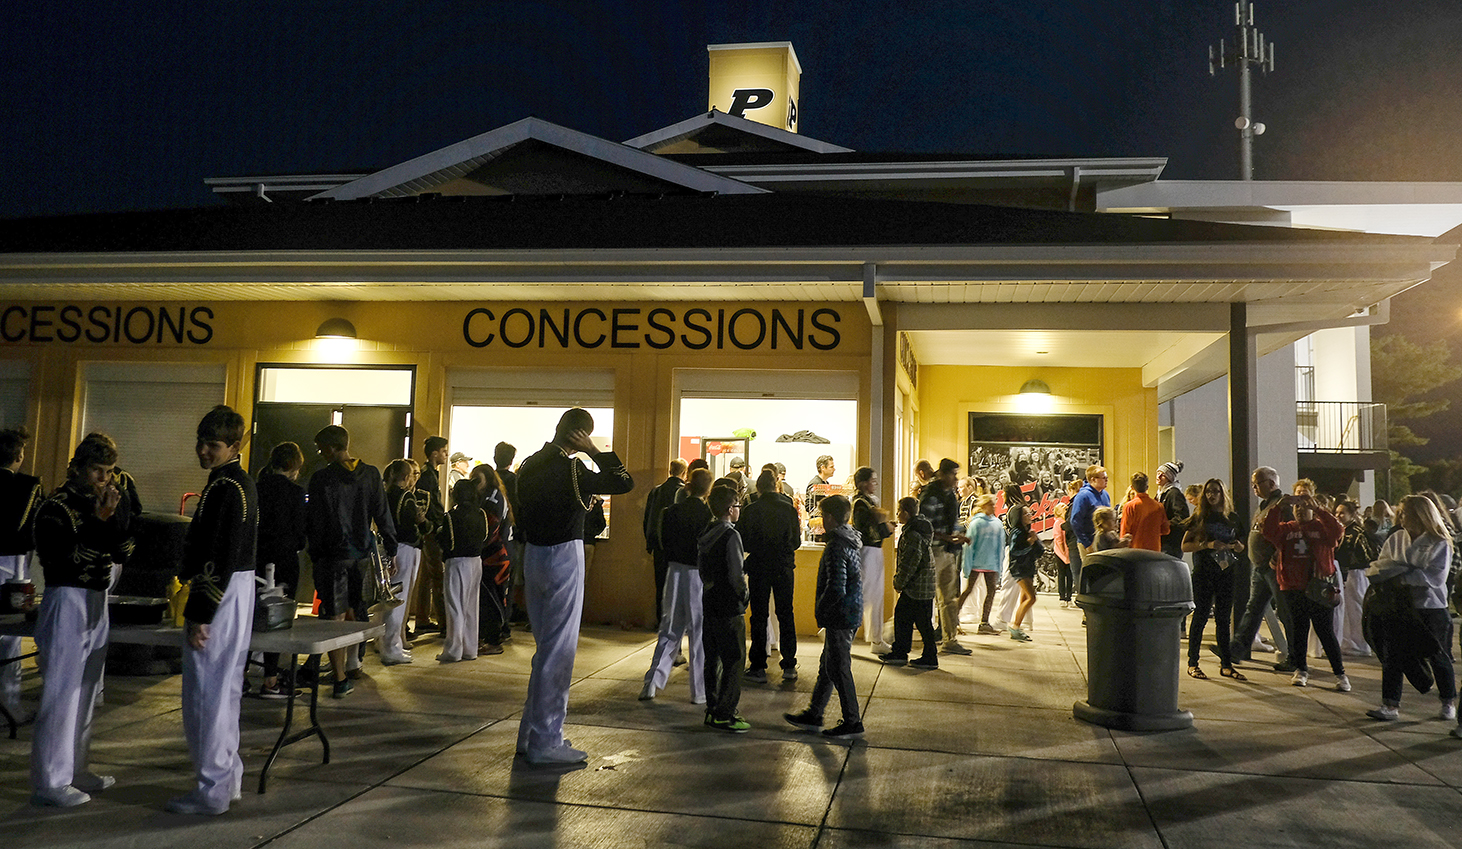 Fridays stay busy at concession stand during home games in Perrysburg